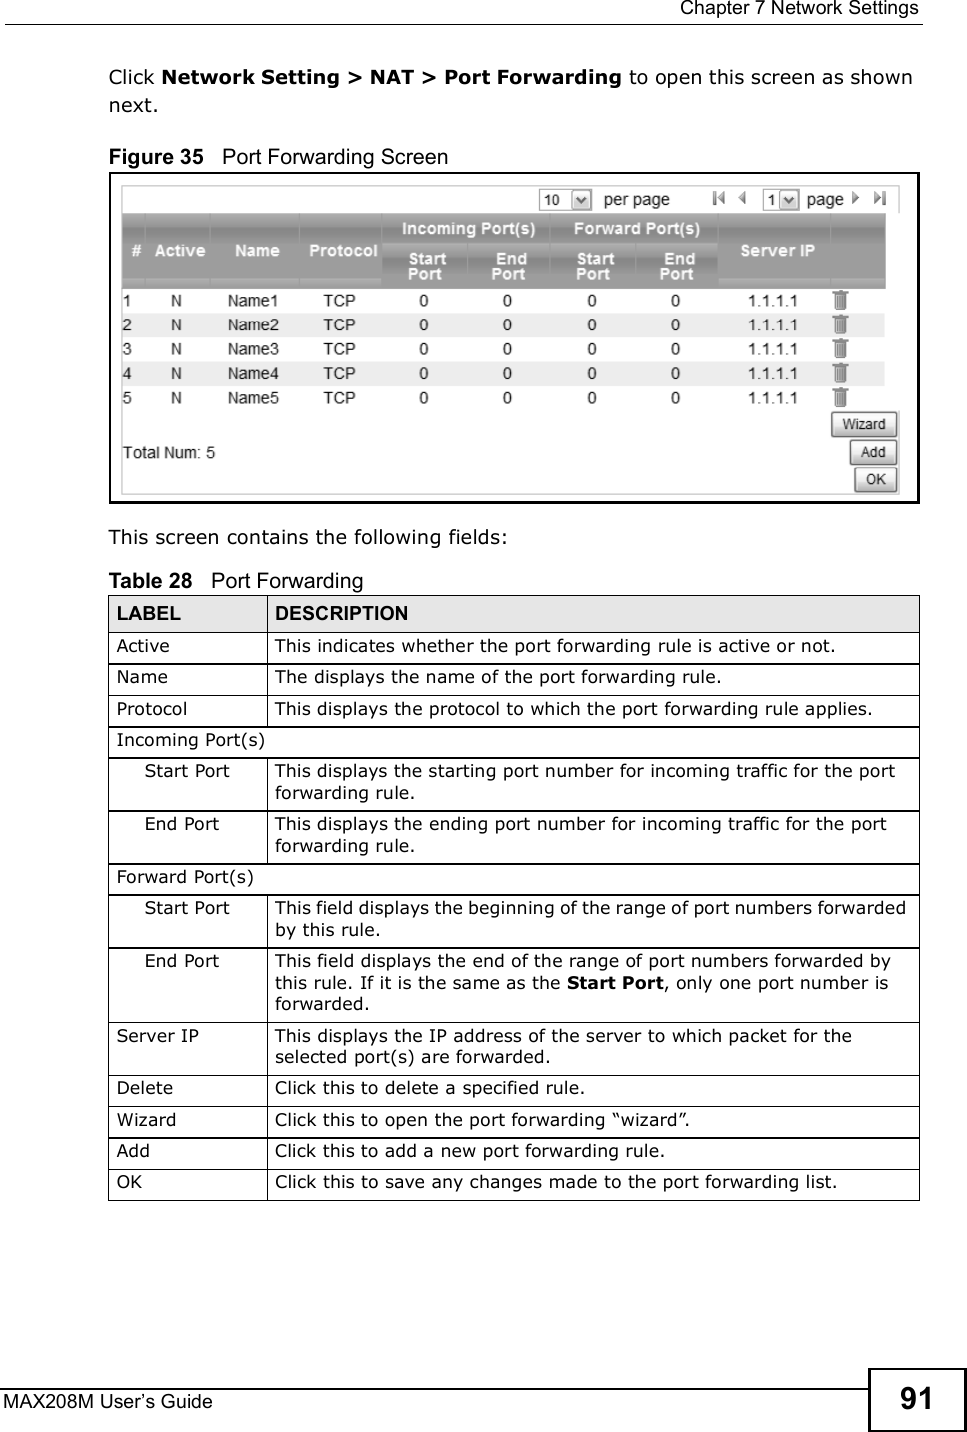  Chapter 7Network SettingsMAX208M User s Guide 91Click Network Setting &gt; NAT &gt; Port Forwarding to open this screen as shown next.Figure 35   Port Forwarding ScreenThis screen contains the following fields:Table 28   Port ForwardingLABEL DESCRIPTIONActiveThis indicates whether the port forwarding rule is active or not.NameThe displays the name of the port forwarding rule.ProtocolThis displays the protocol to which the port forwarding rule applies.Incoming Port(s)Start PortThis displays the starting port number for incoming traffic for the port forwarding rule.End PortThis displays the ending port number for incoming traffic for the port forwarding rule.Forward Port(s)Start Port This field displays the beginning of the range of port numbers forwarded by this rule.End Port This field displays the end of the range of port numbers forwarded by this rule. If it is the same as the Start Port, only one port number is forwarded.Server IPThis displays the IP address of the server to which packet for the selected port(s) are forwarded.DeleteClick this to delete a specified rule.WizardClick this to open the port forwarding &quot;wizard#.AddClick this to add a new port forwarding rule.OKClick this to save any changes made to the port forwarding list.